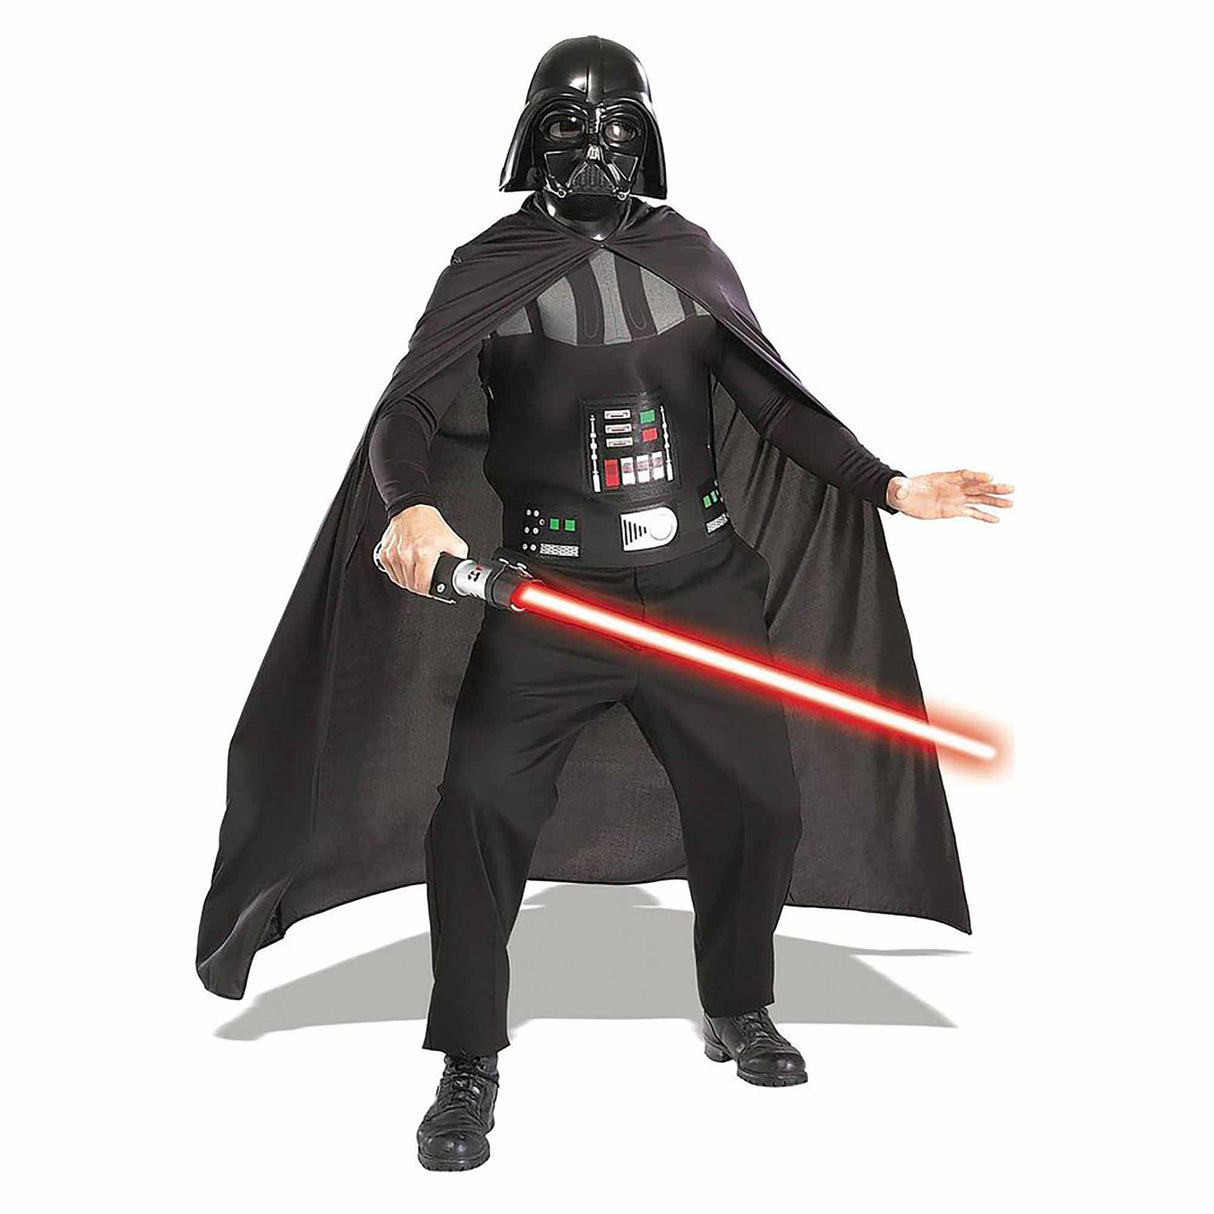 Rubies Darth Vader Adult Accessory Set with Lightsaber